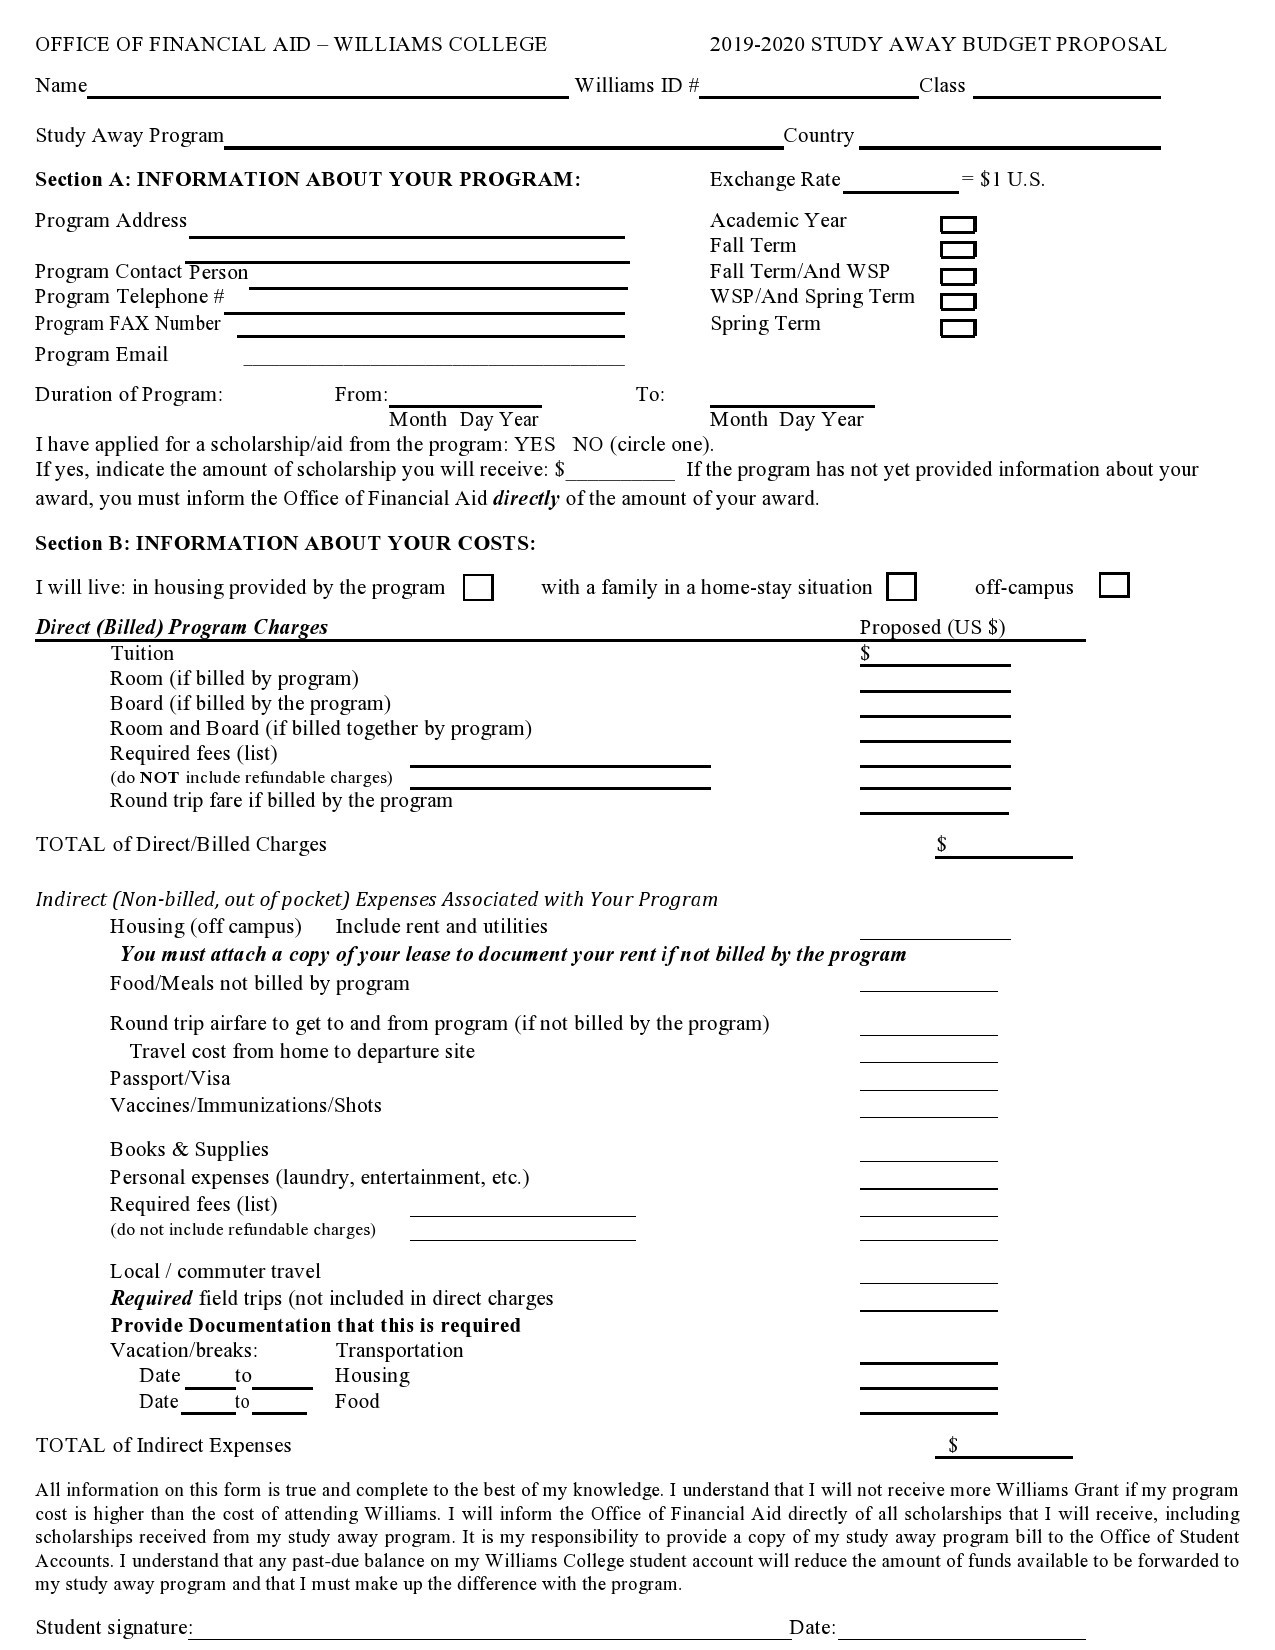 Free budget proposal template 24